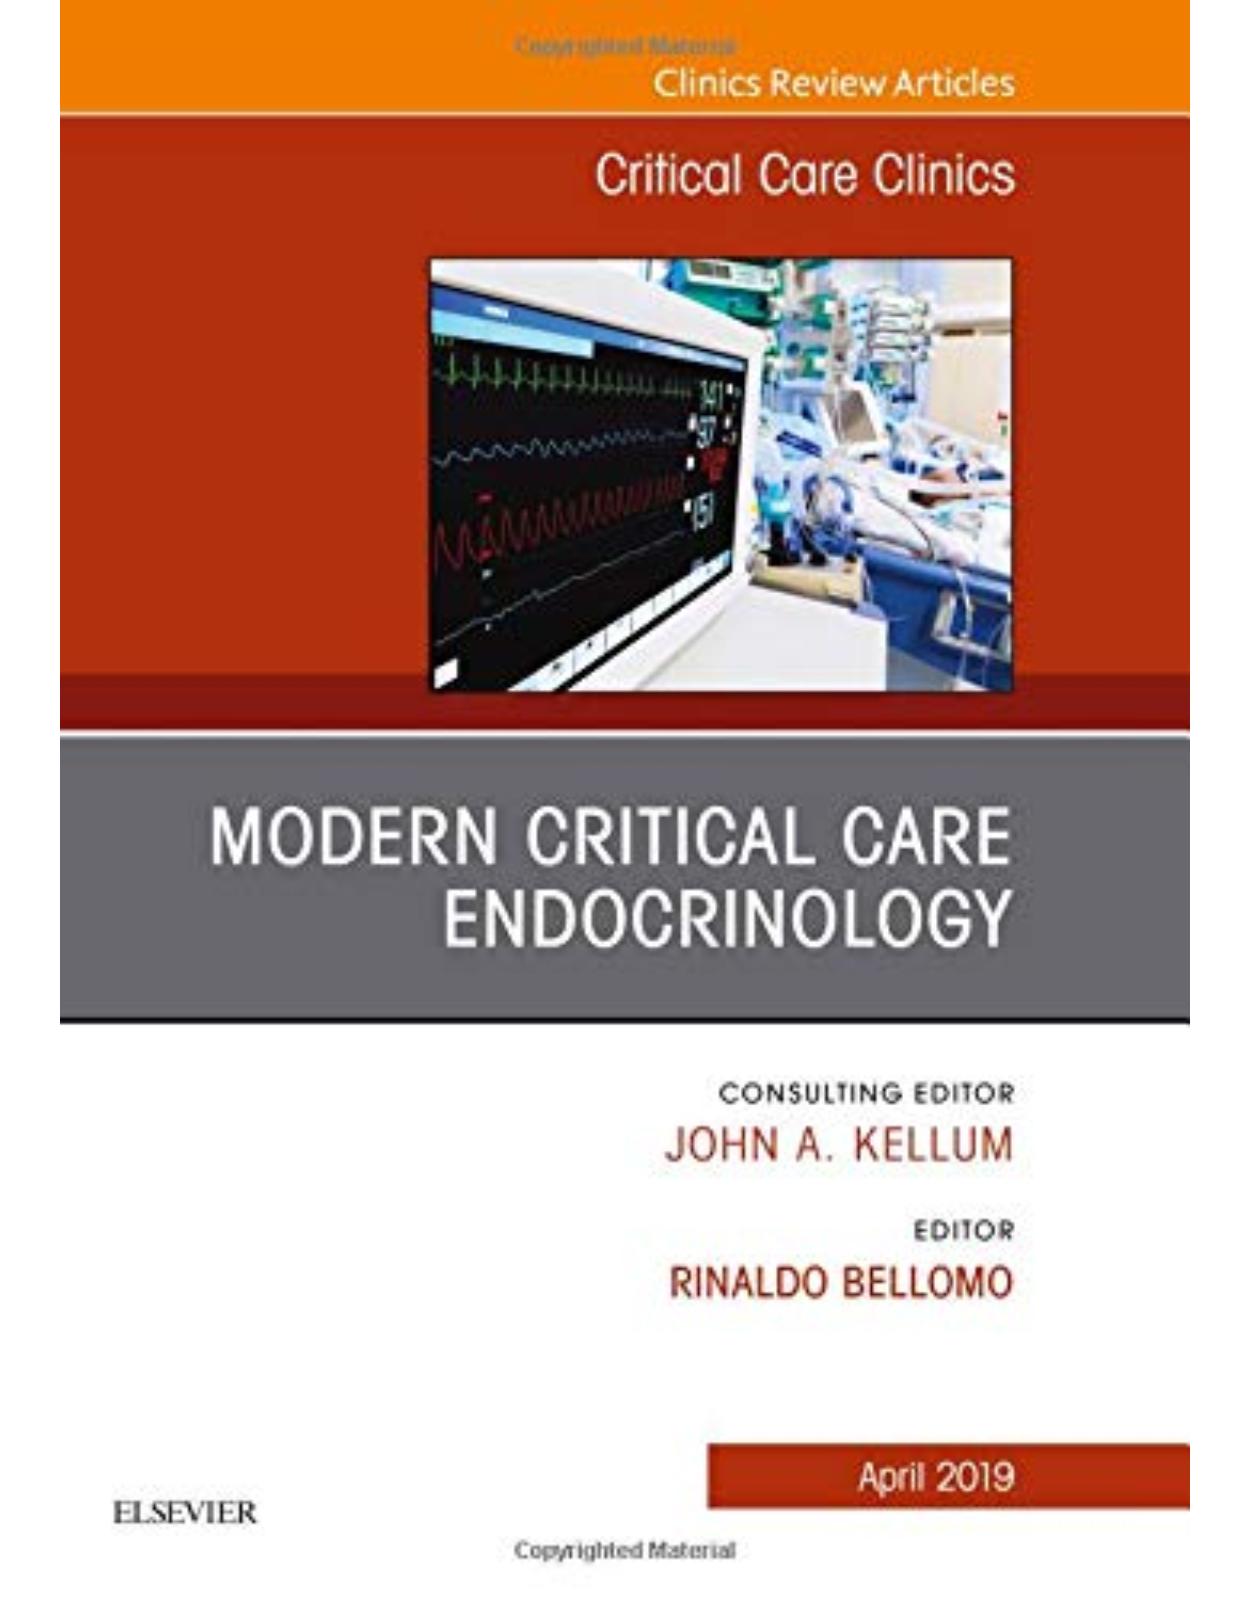 Modern Critical Care Endocrinology, An Issue of Critical Care Clinics, Volume 35-2